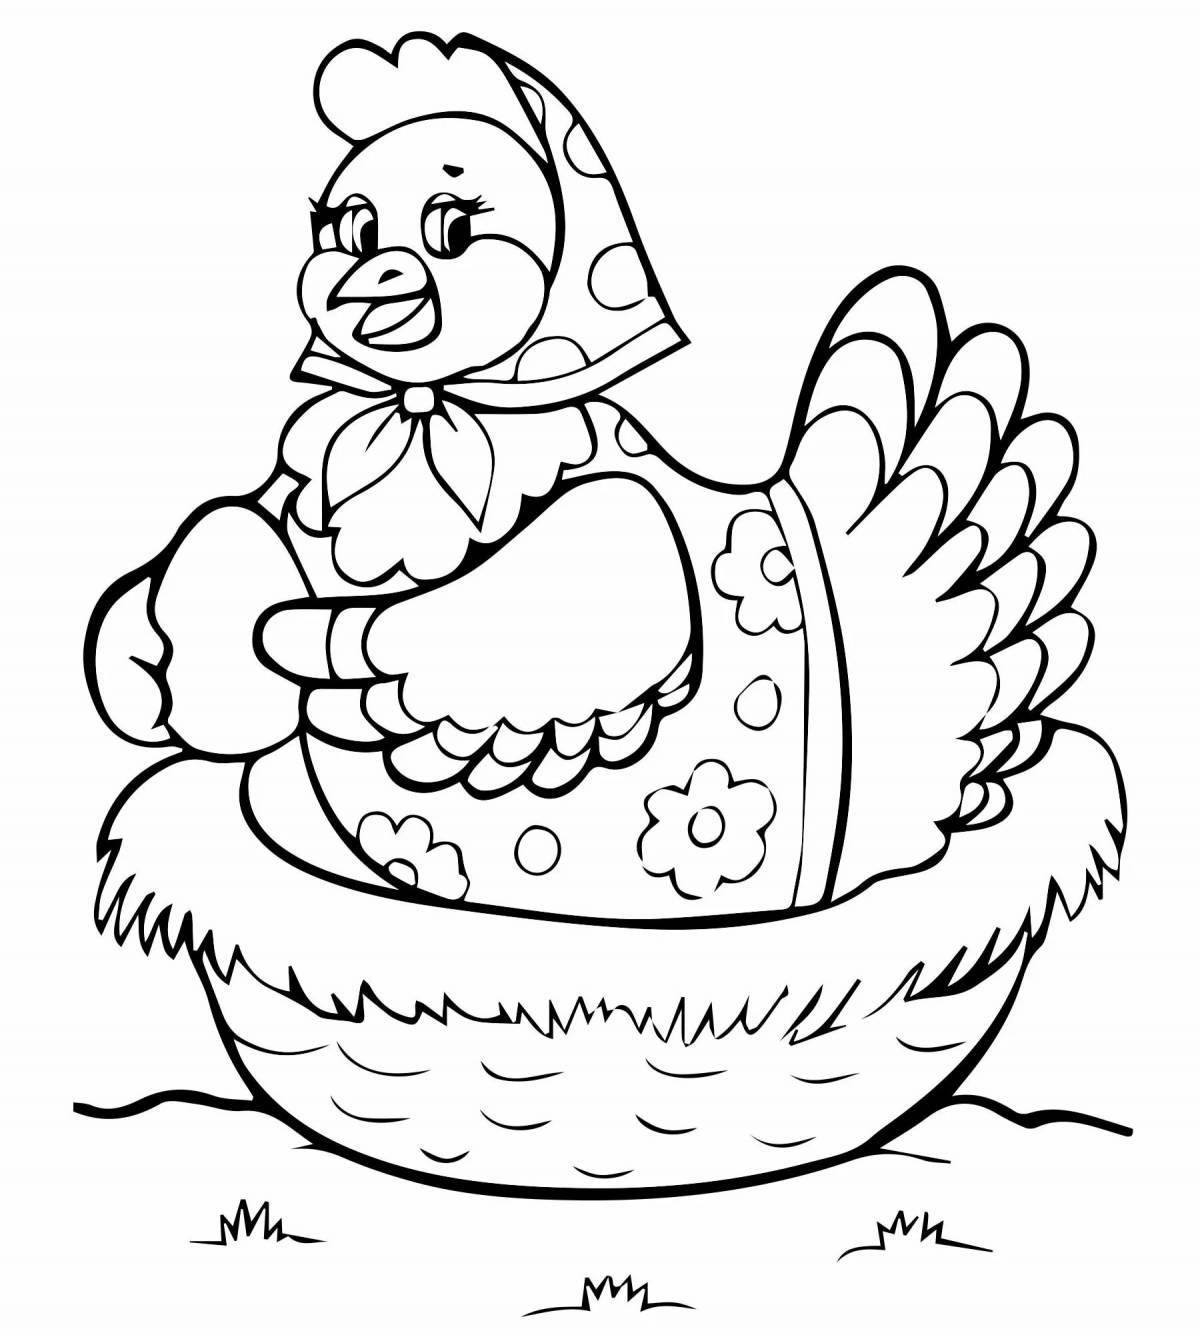 Coloring pages with cute chickens for kids 2-3 years old